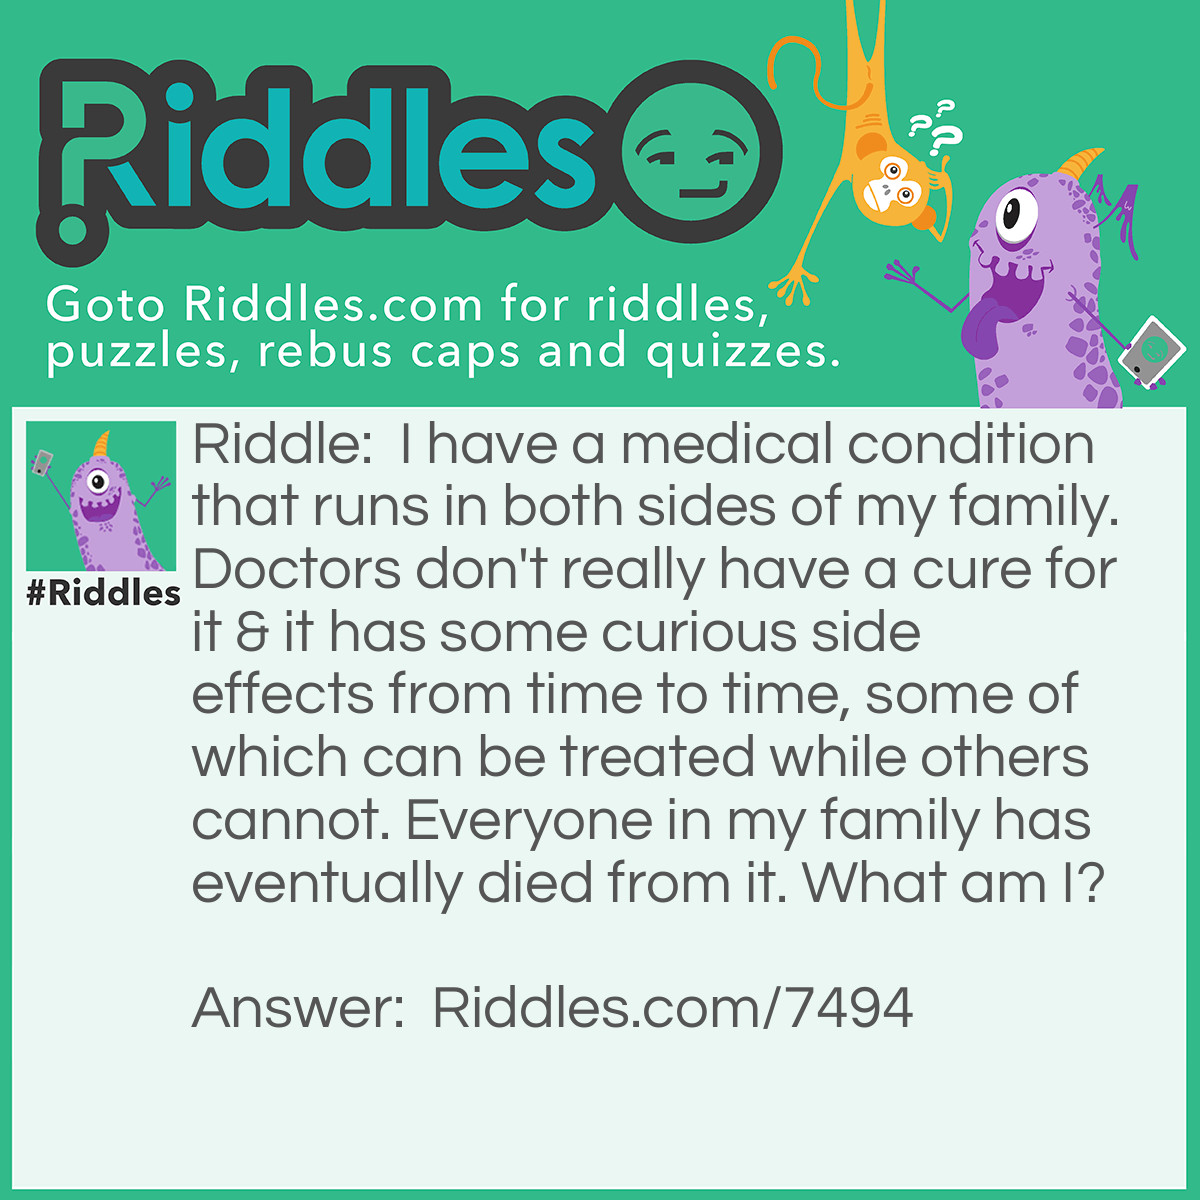 Riddle: I have a medical condition that runs in both sides of my family. Doctors don't really have a cure for it & it has some curious side effects from time to time, some of which can be treated while others cannot. Everyone in my family has eventually died from it. What am I? Answer: Aging.